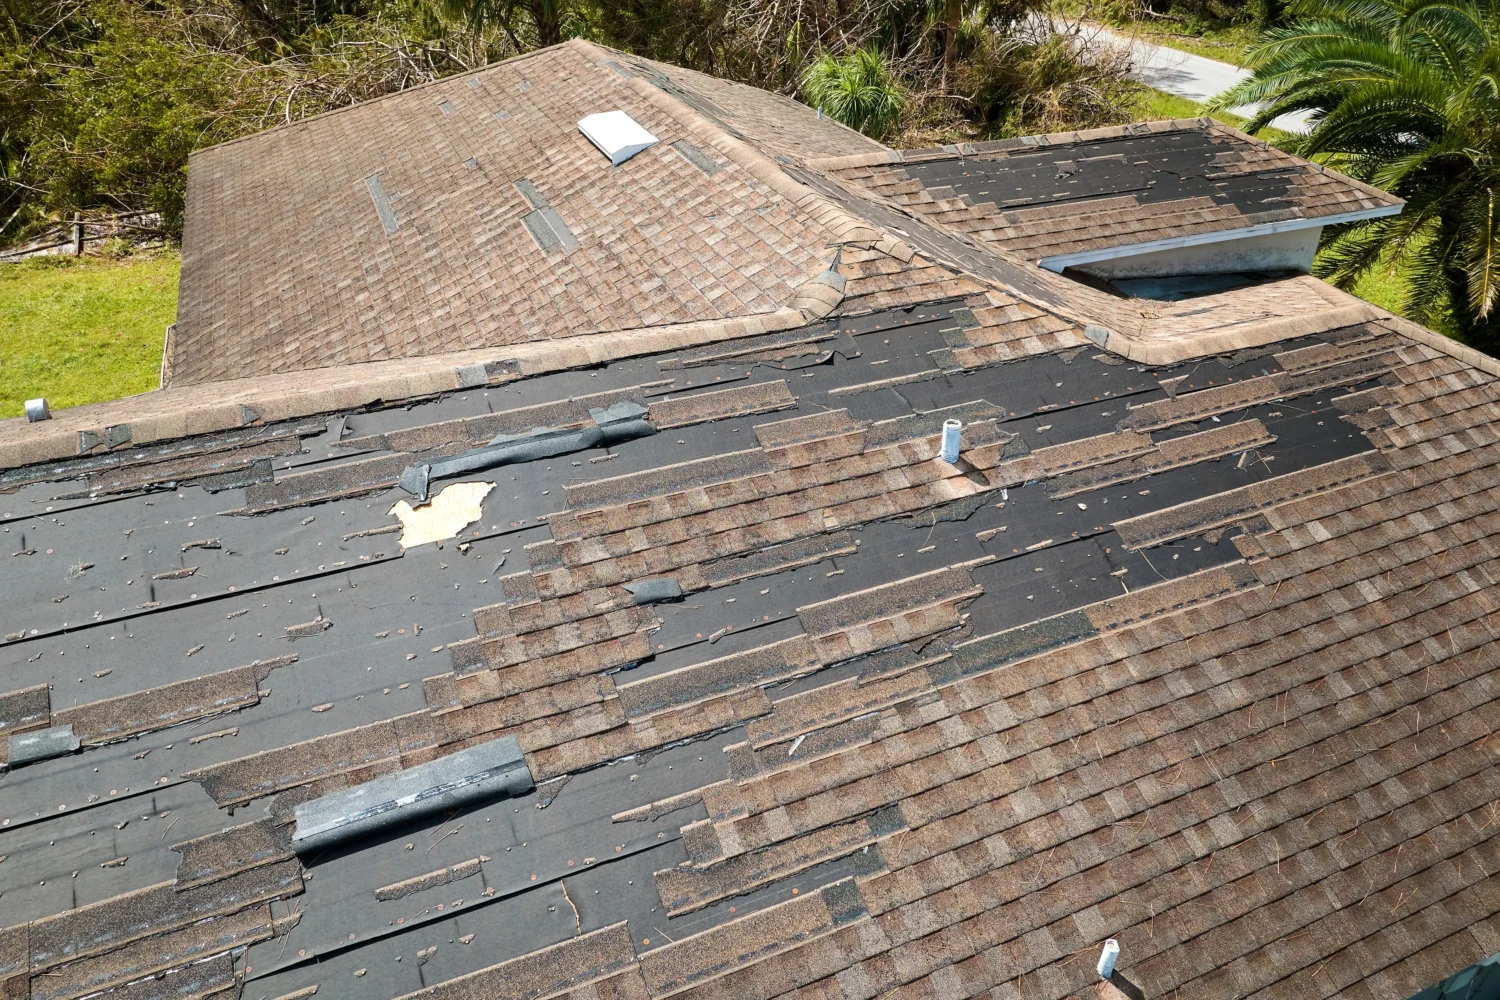 shingle roof with lot's of missing shingles